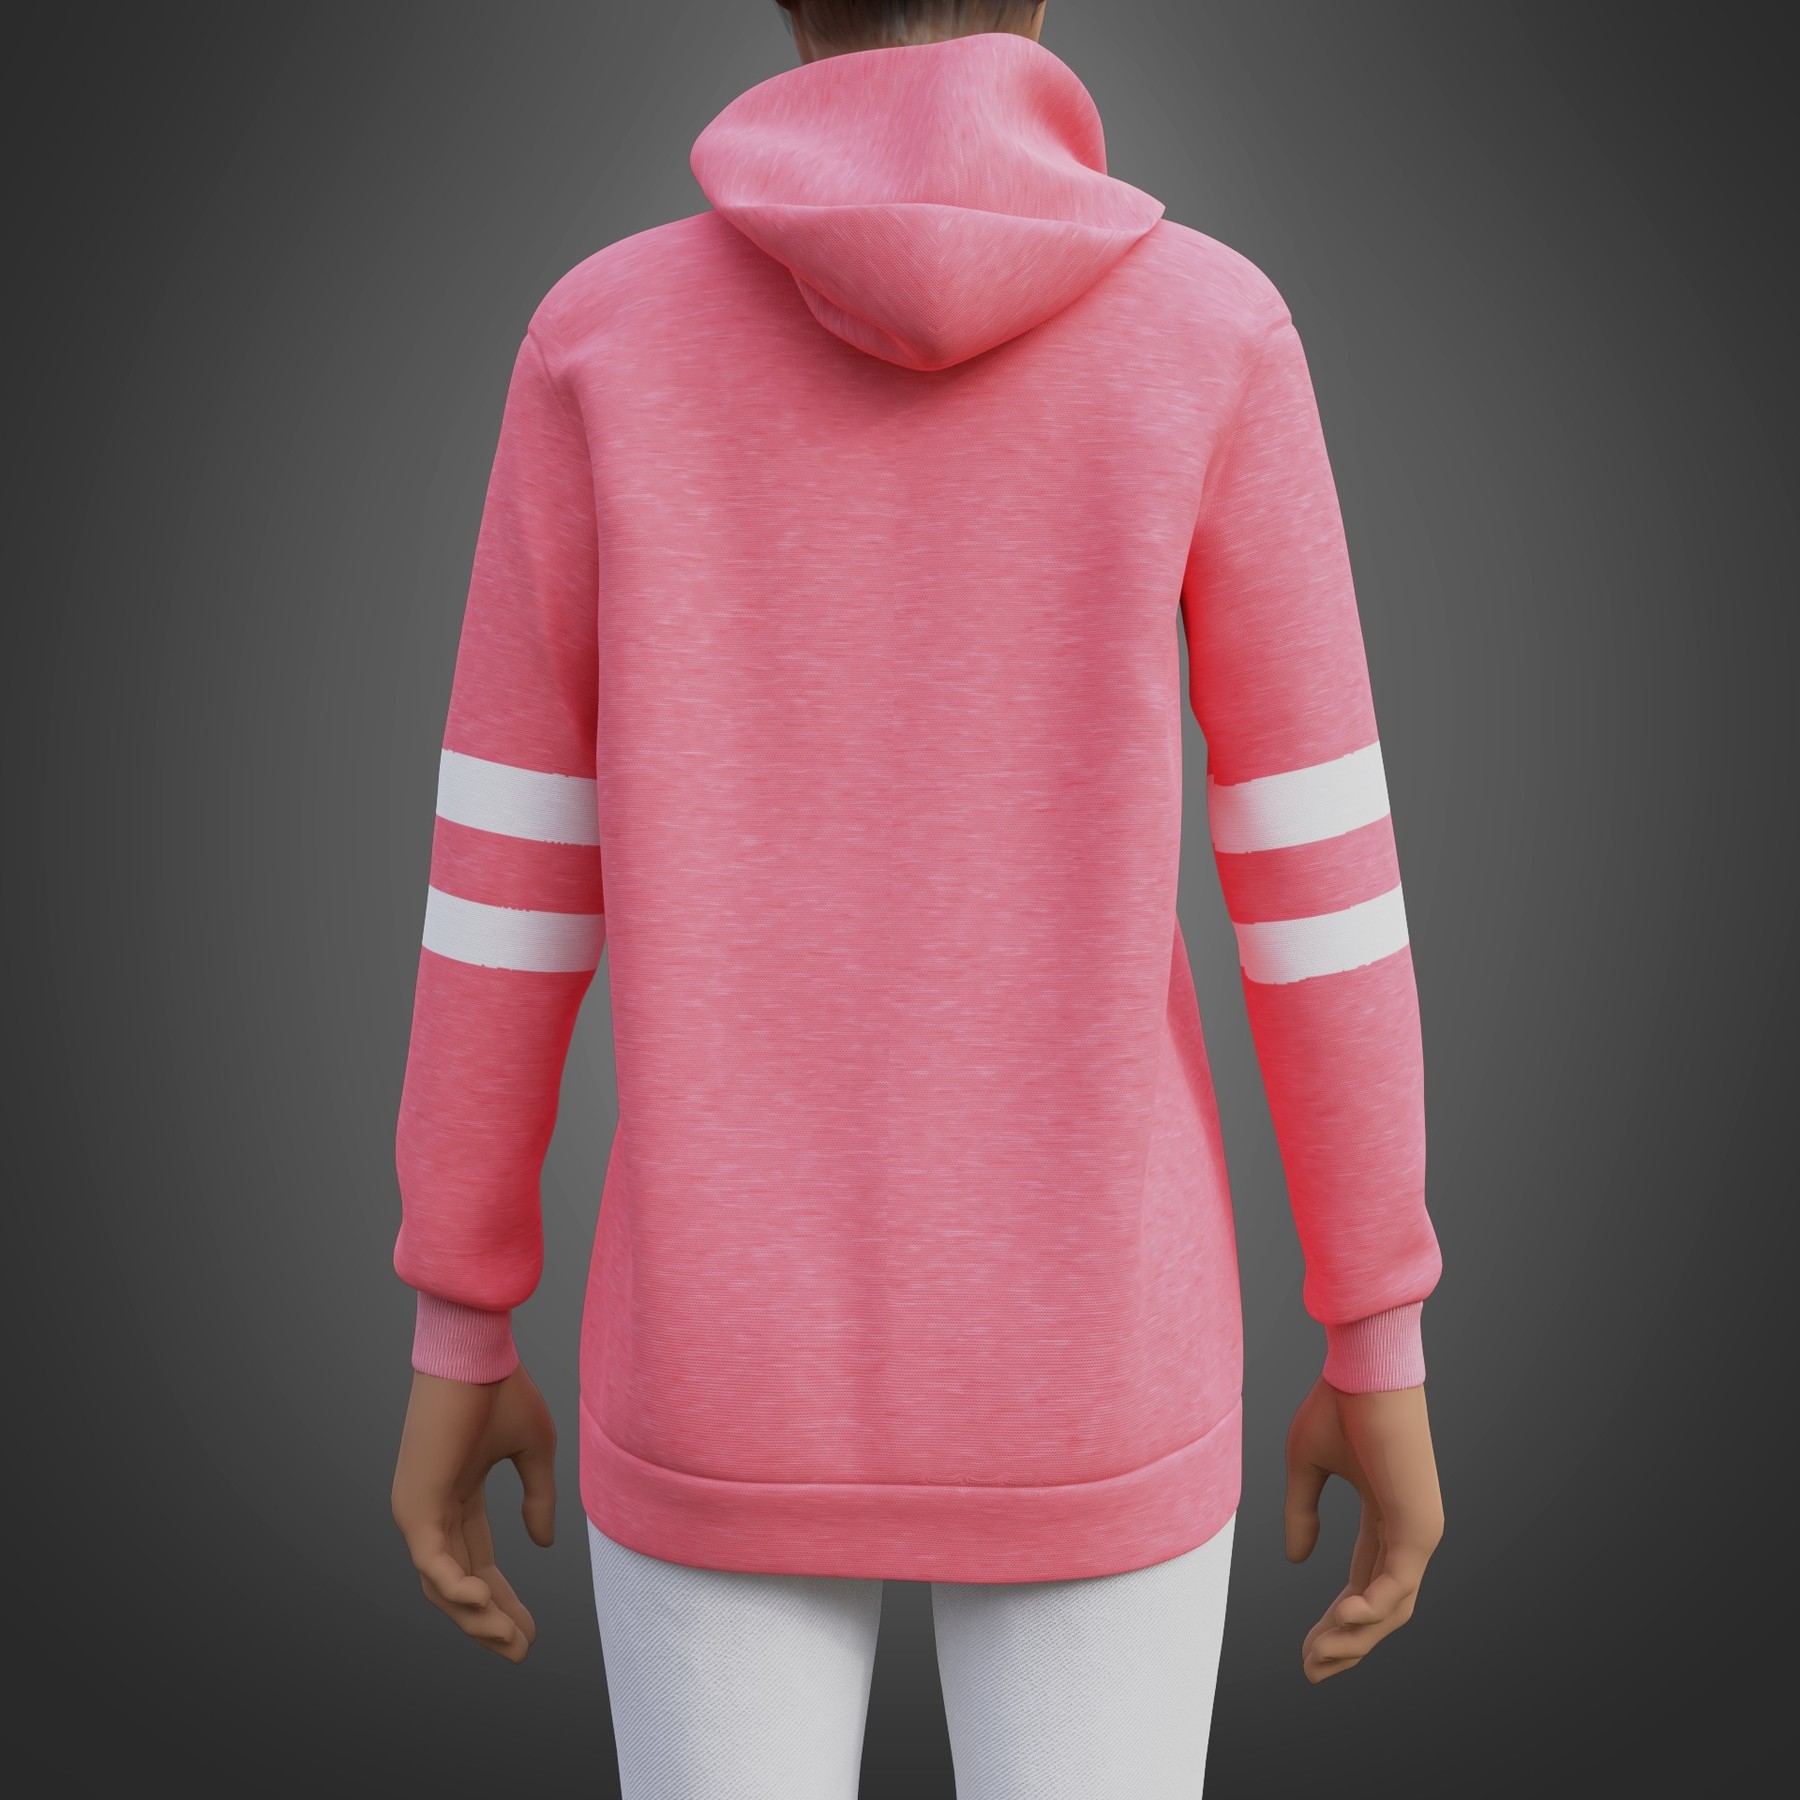 ArtStation - Cute outfit - oversized | and Assets pink Model hoodie 3D Game leggings